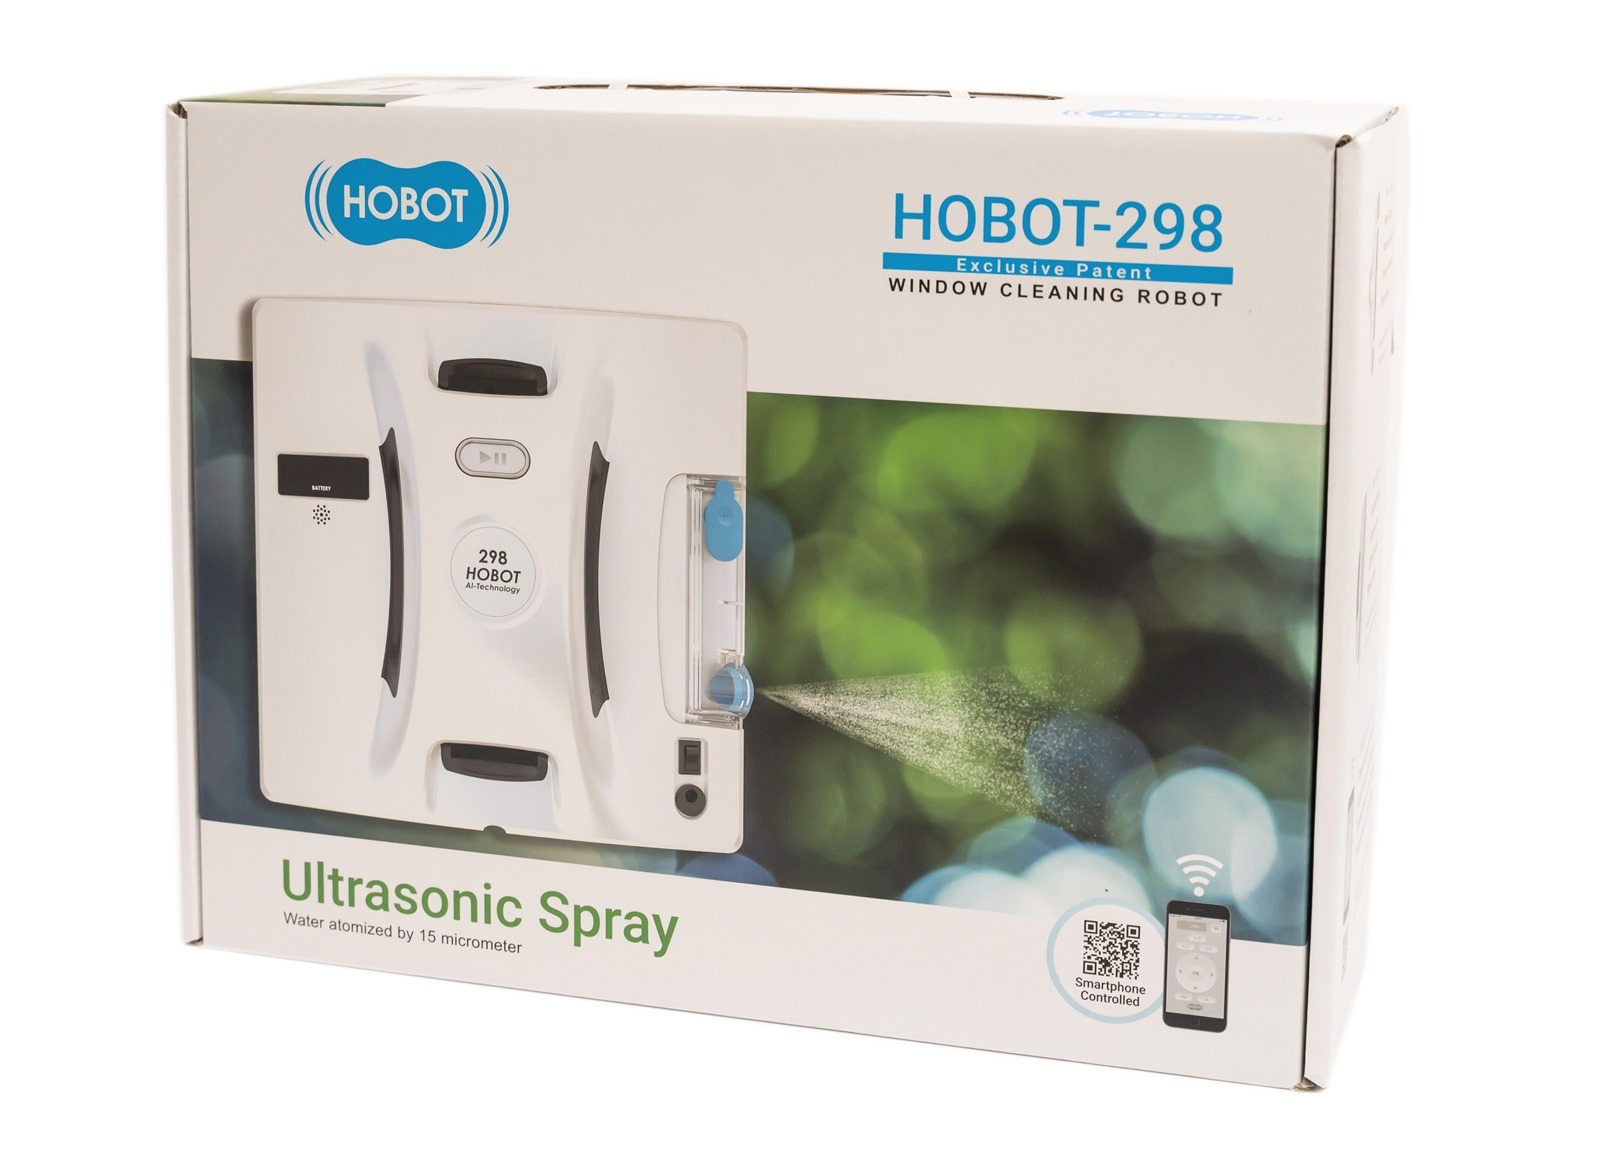 Don’t feel like to clean your windows for the year-end house cleaning? Leave it to HOBOT 298 auto-ultrasonic spray window cleaning robot! Giving you sparkling, crystal clear windows all year round! @3C 達人廖阿輝